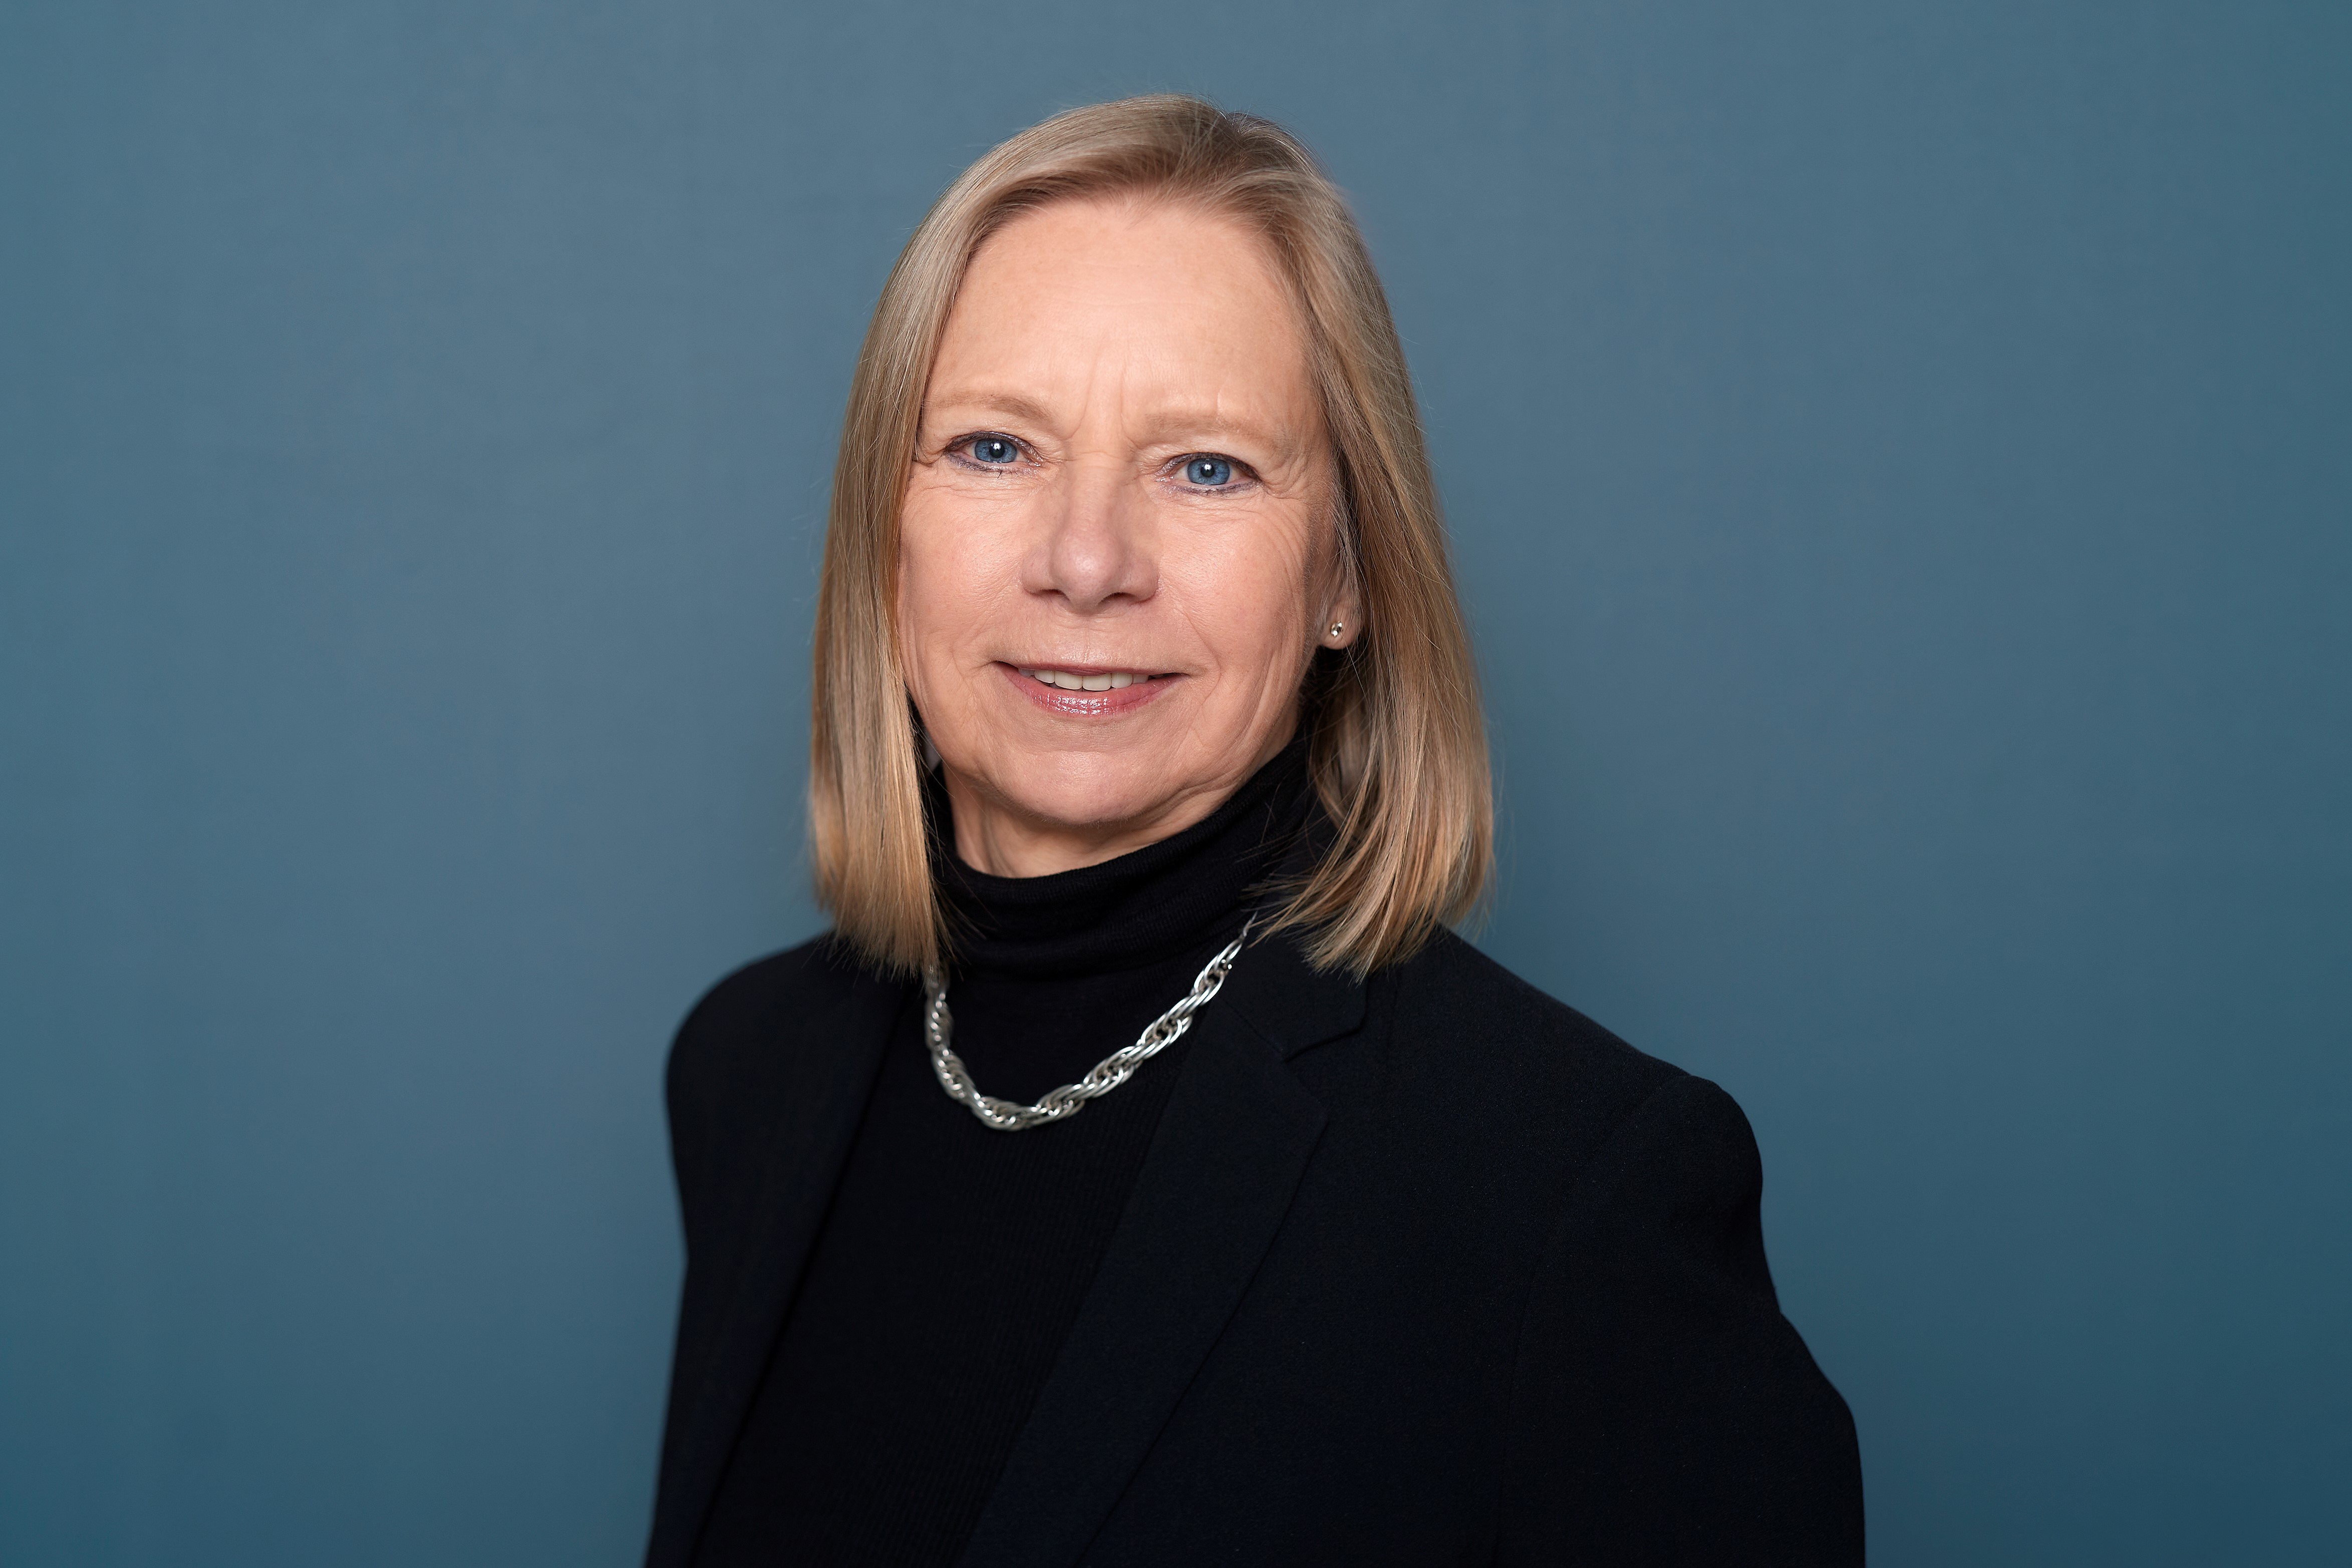 Dr. Kirsi Tikka has joined Foreship’s Board of Directors